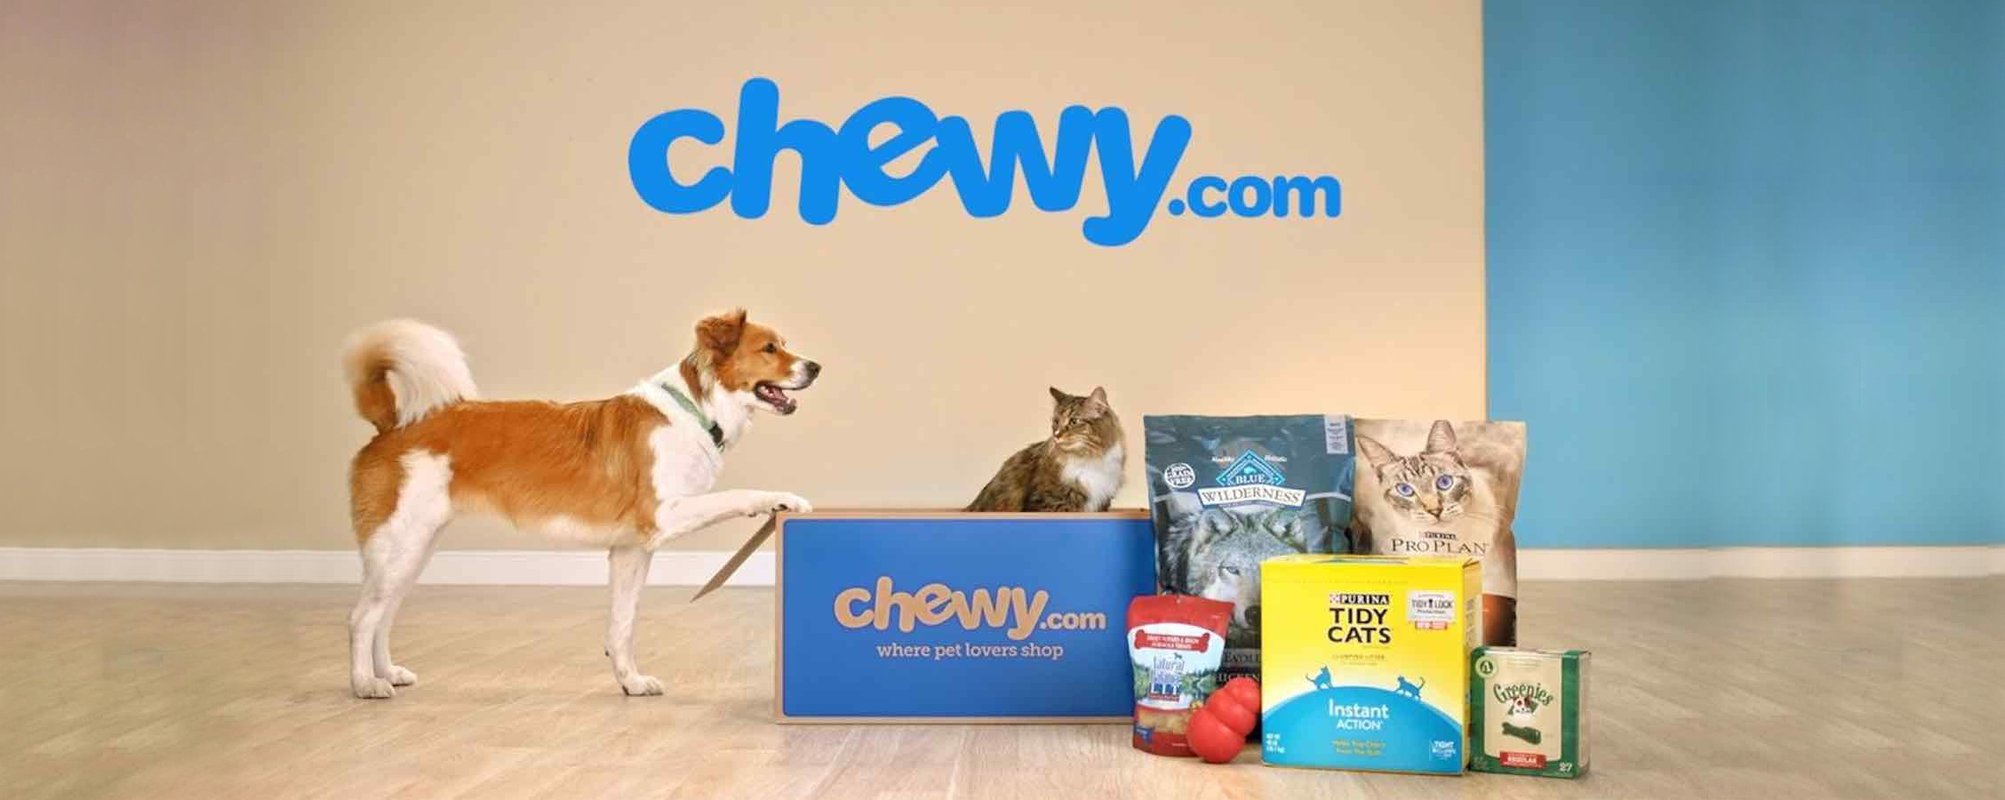 There are numerous packages of cat and dog food on the floor, a cat is sitting in the box with CHEWY.COM logo on it, while the dog stands beside it